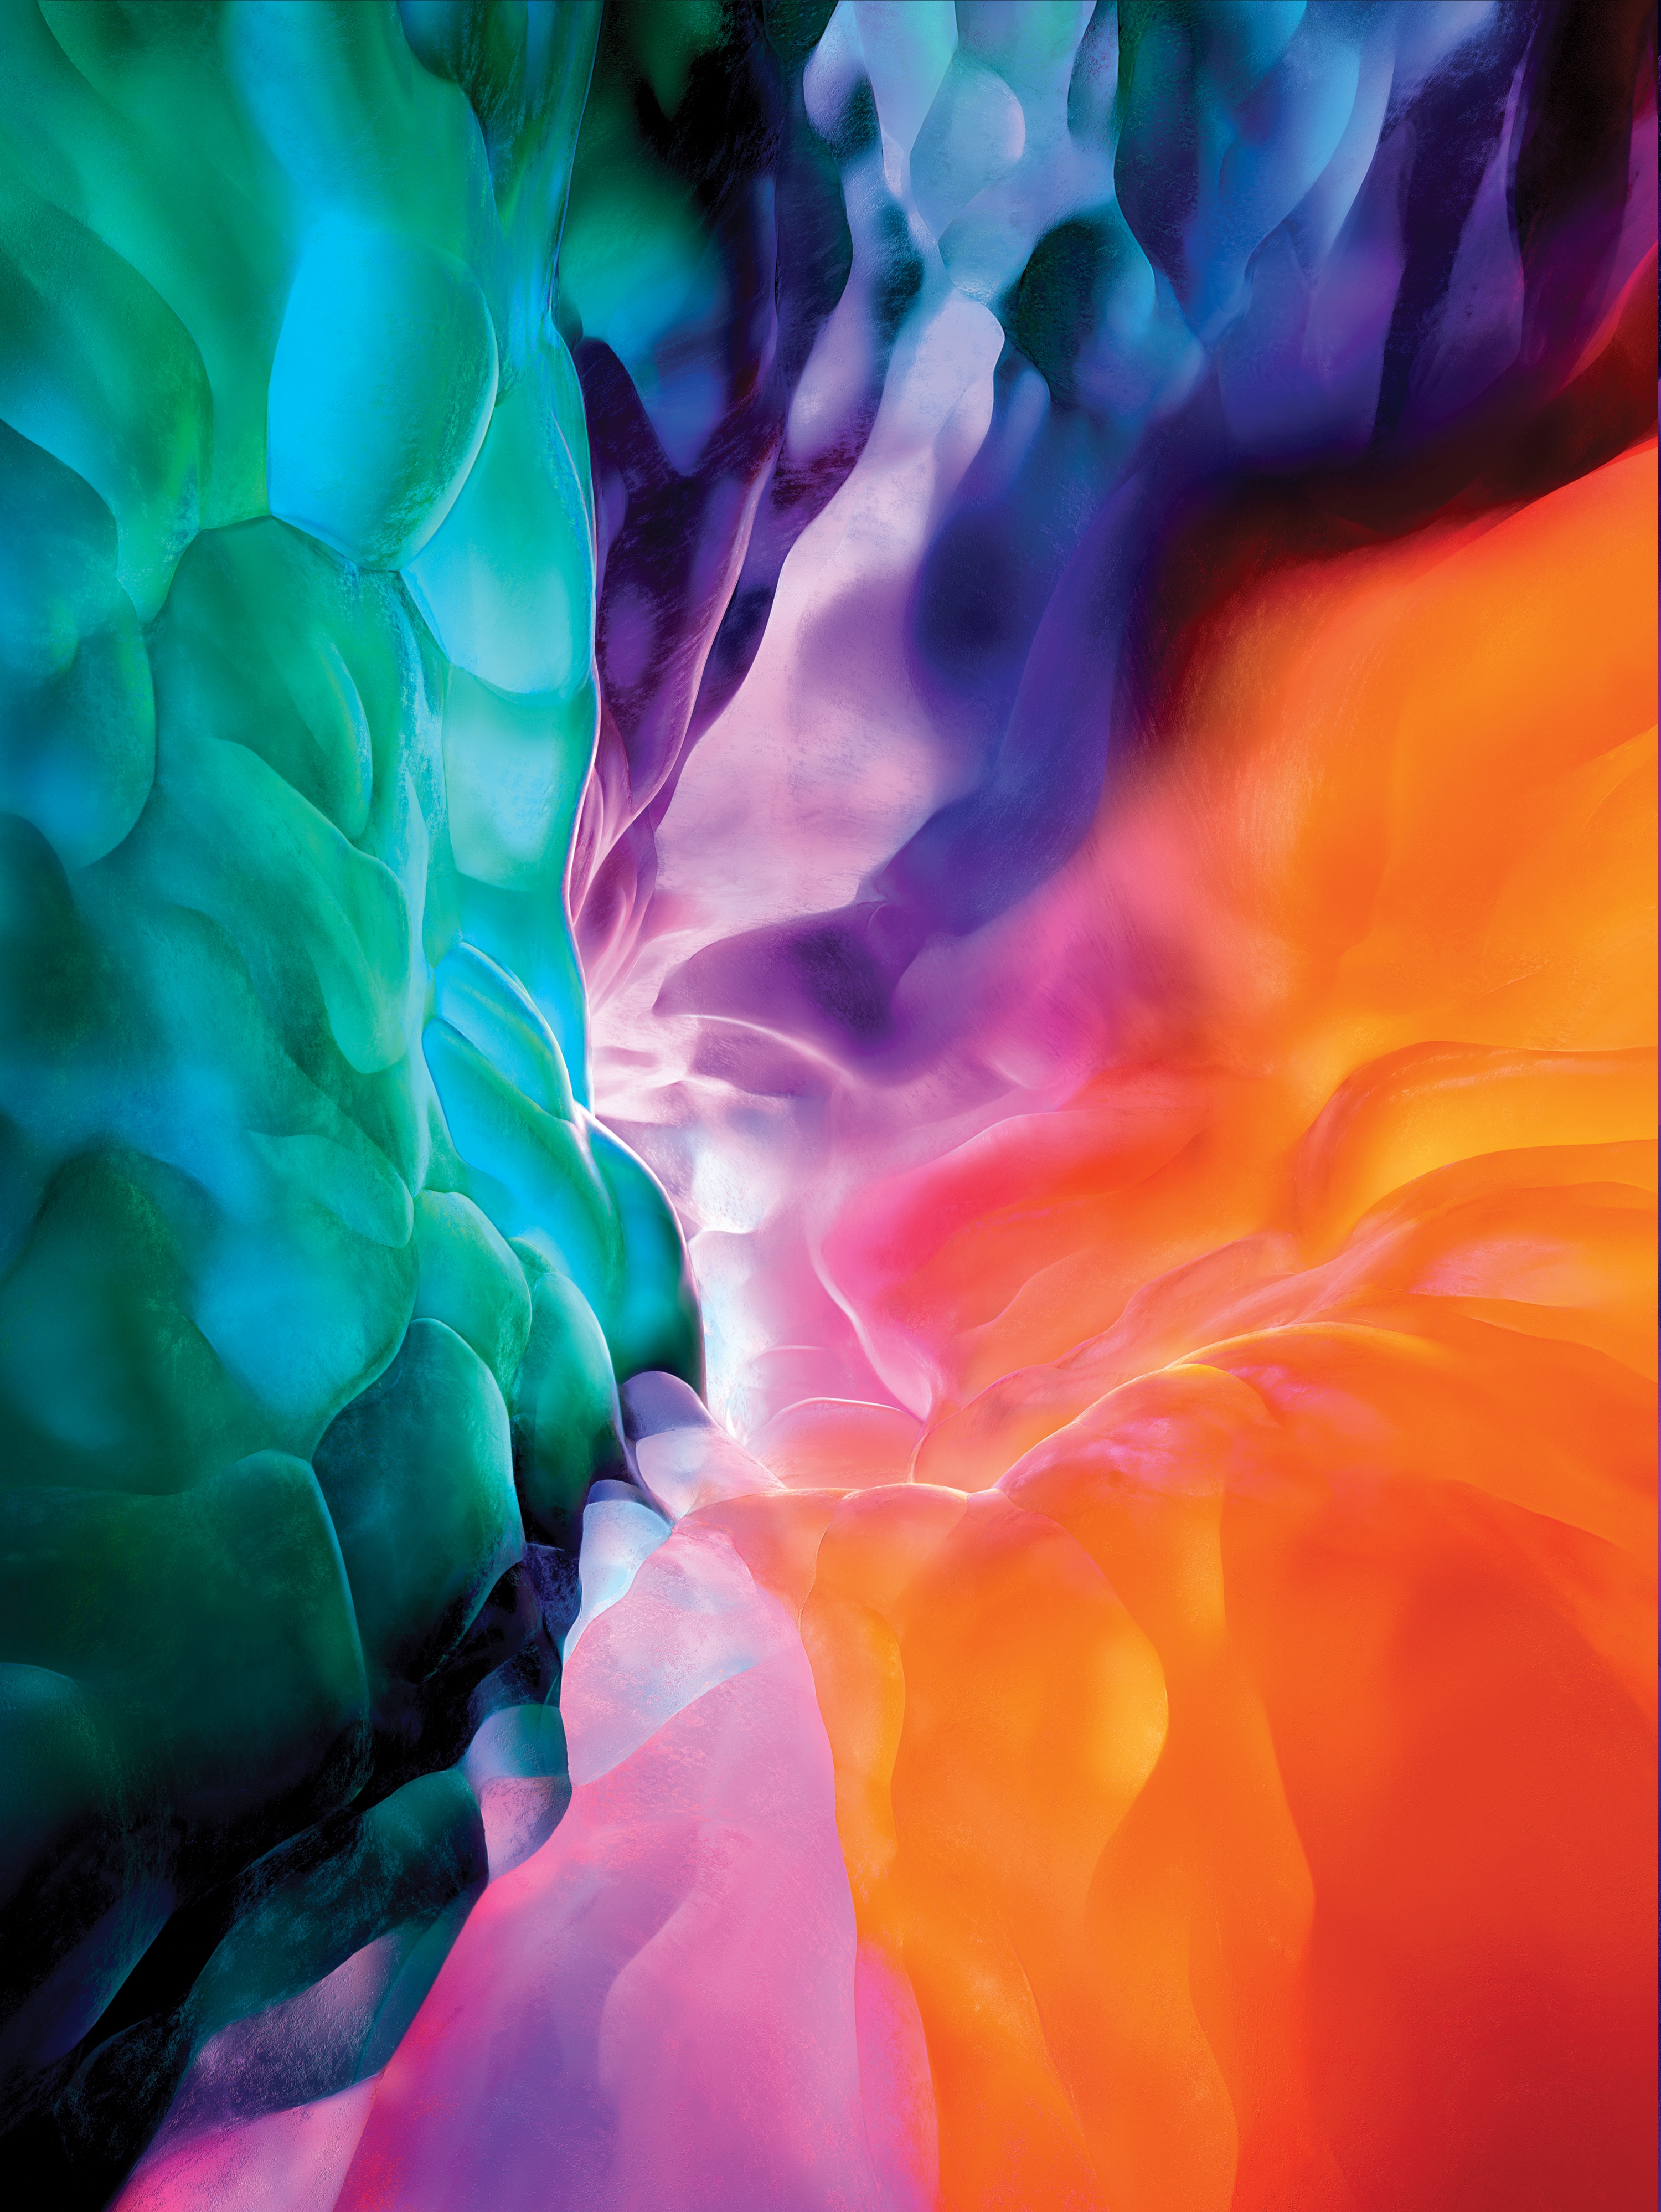 The new iPad Pro wallpapers for iPad